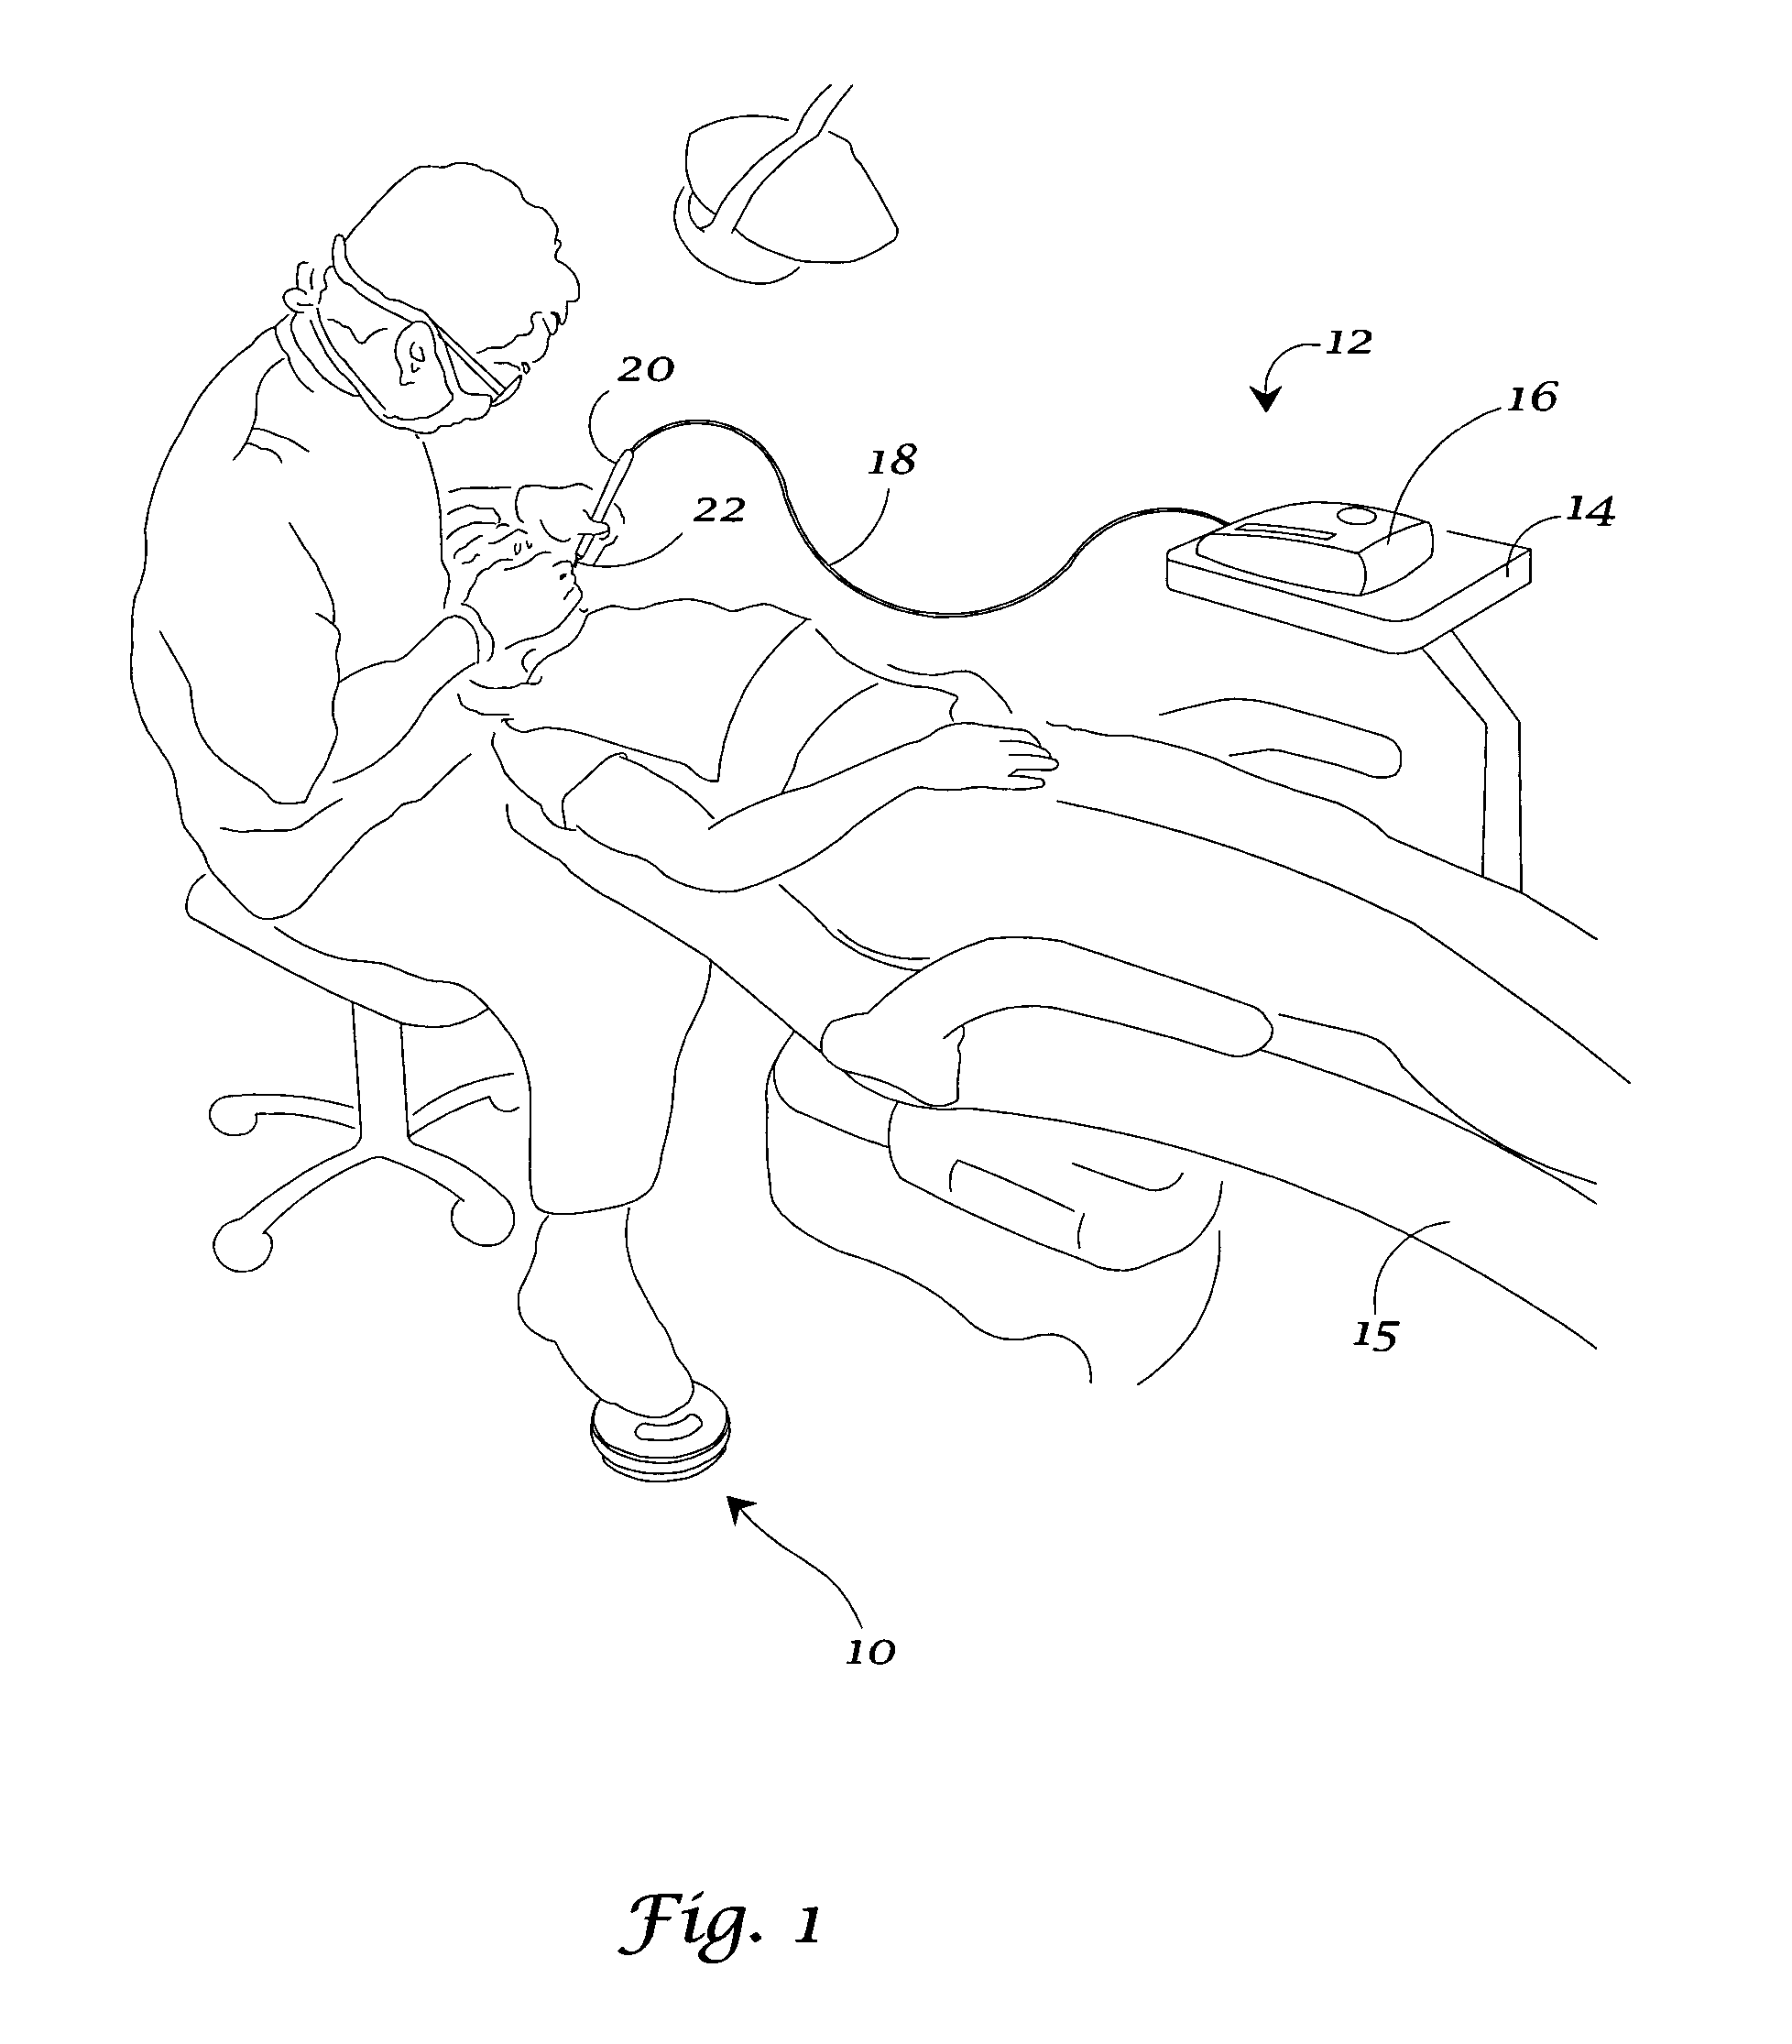 Foot switch for activating a dental or medical treatment apparatus